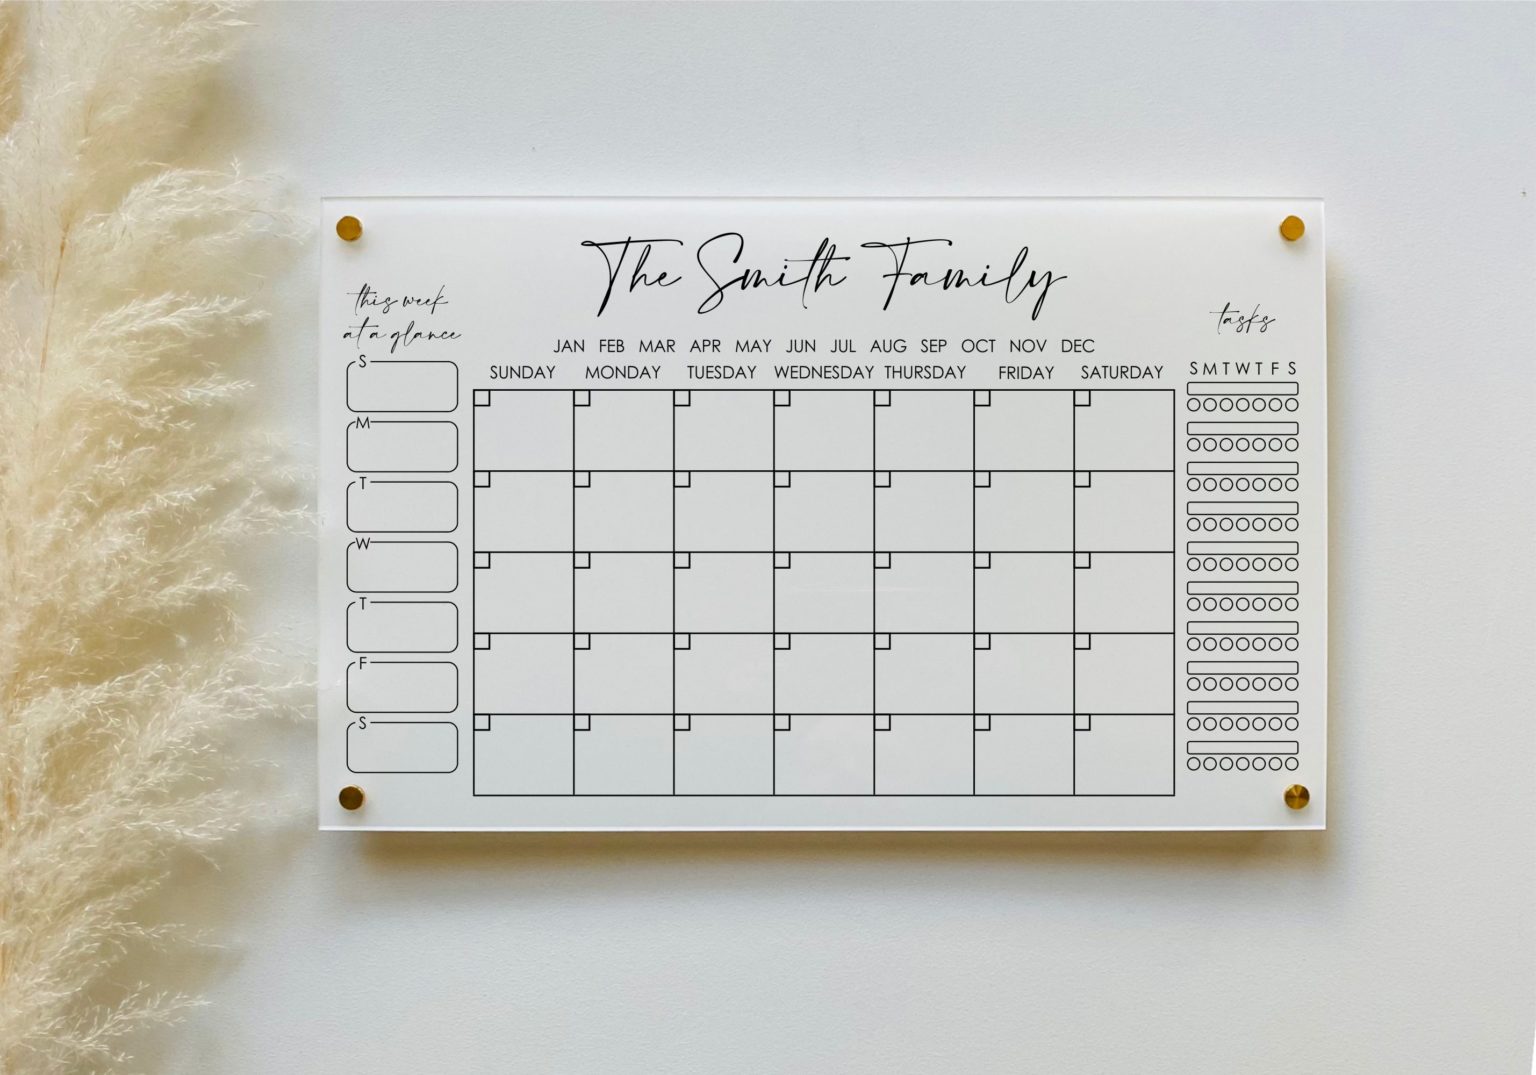 Personalized Acrylic Calendar For Wall 1801 & Co